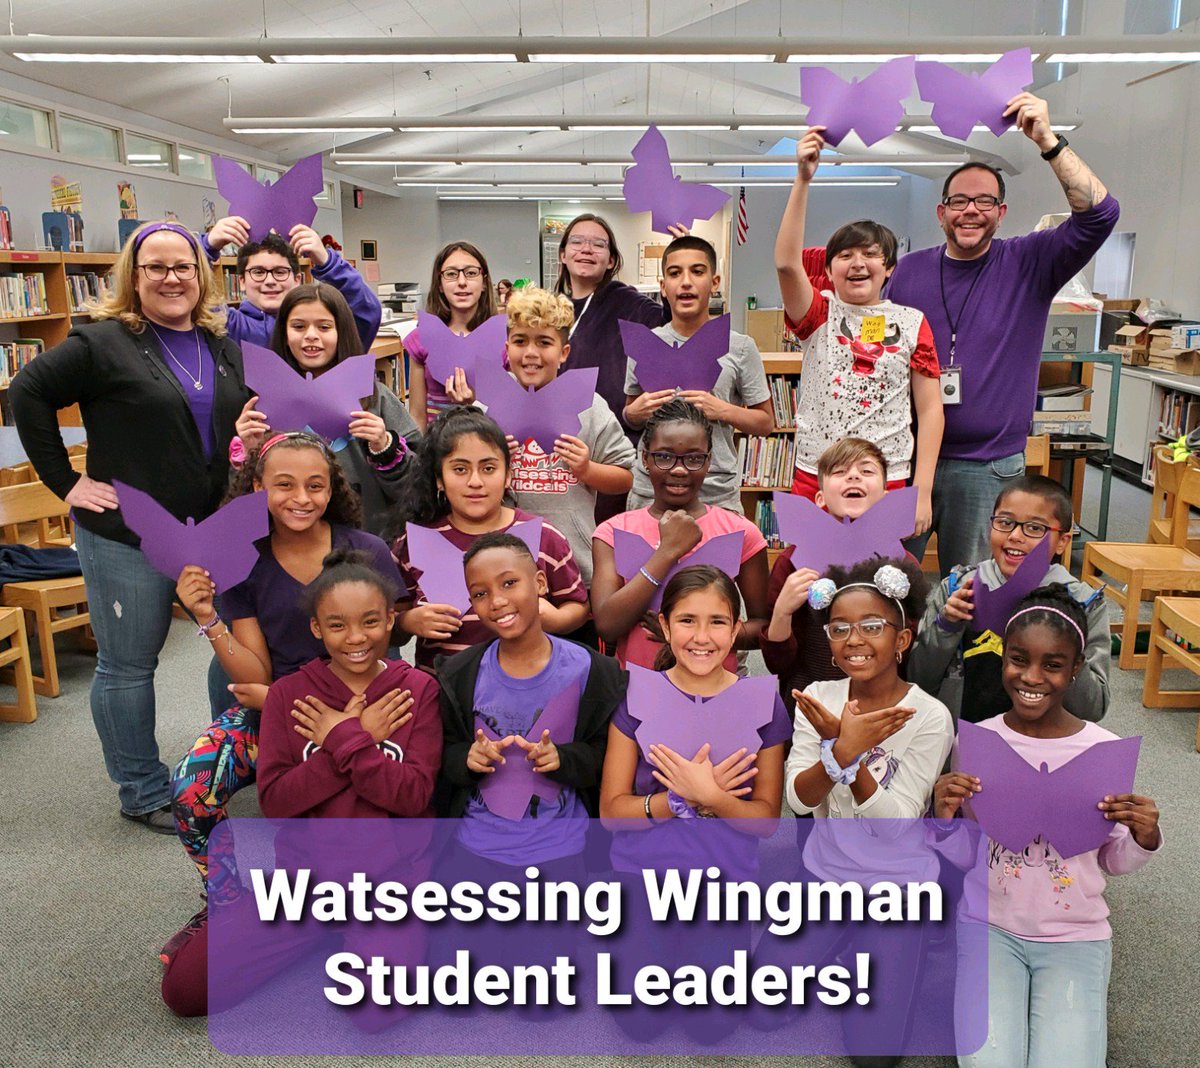 Student Training is complete for our Wingman Student Leaders. Looking forward to watching this program take off at Watsessing School! What an absolute amazing group of students!